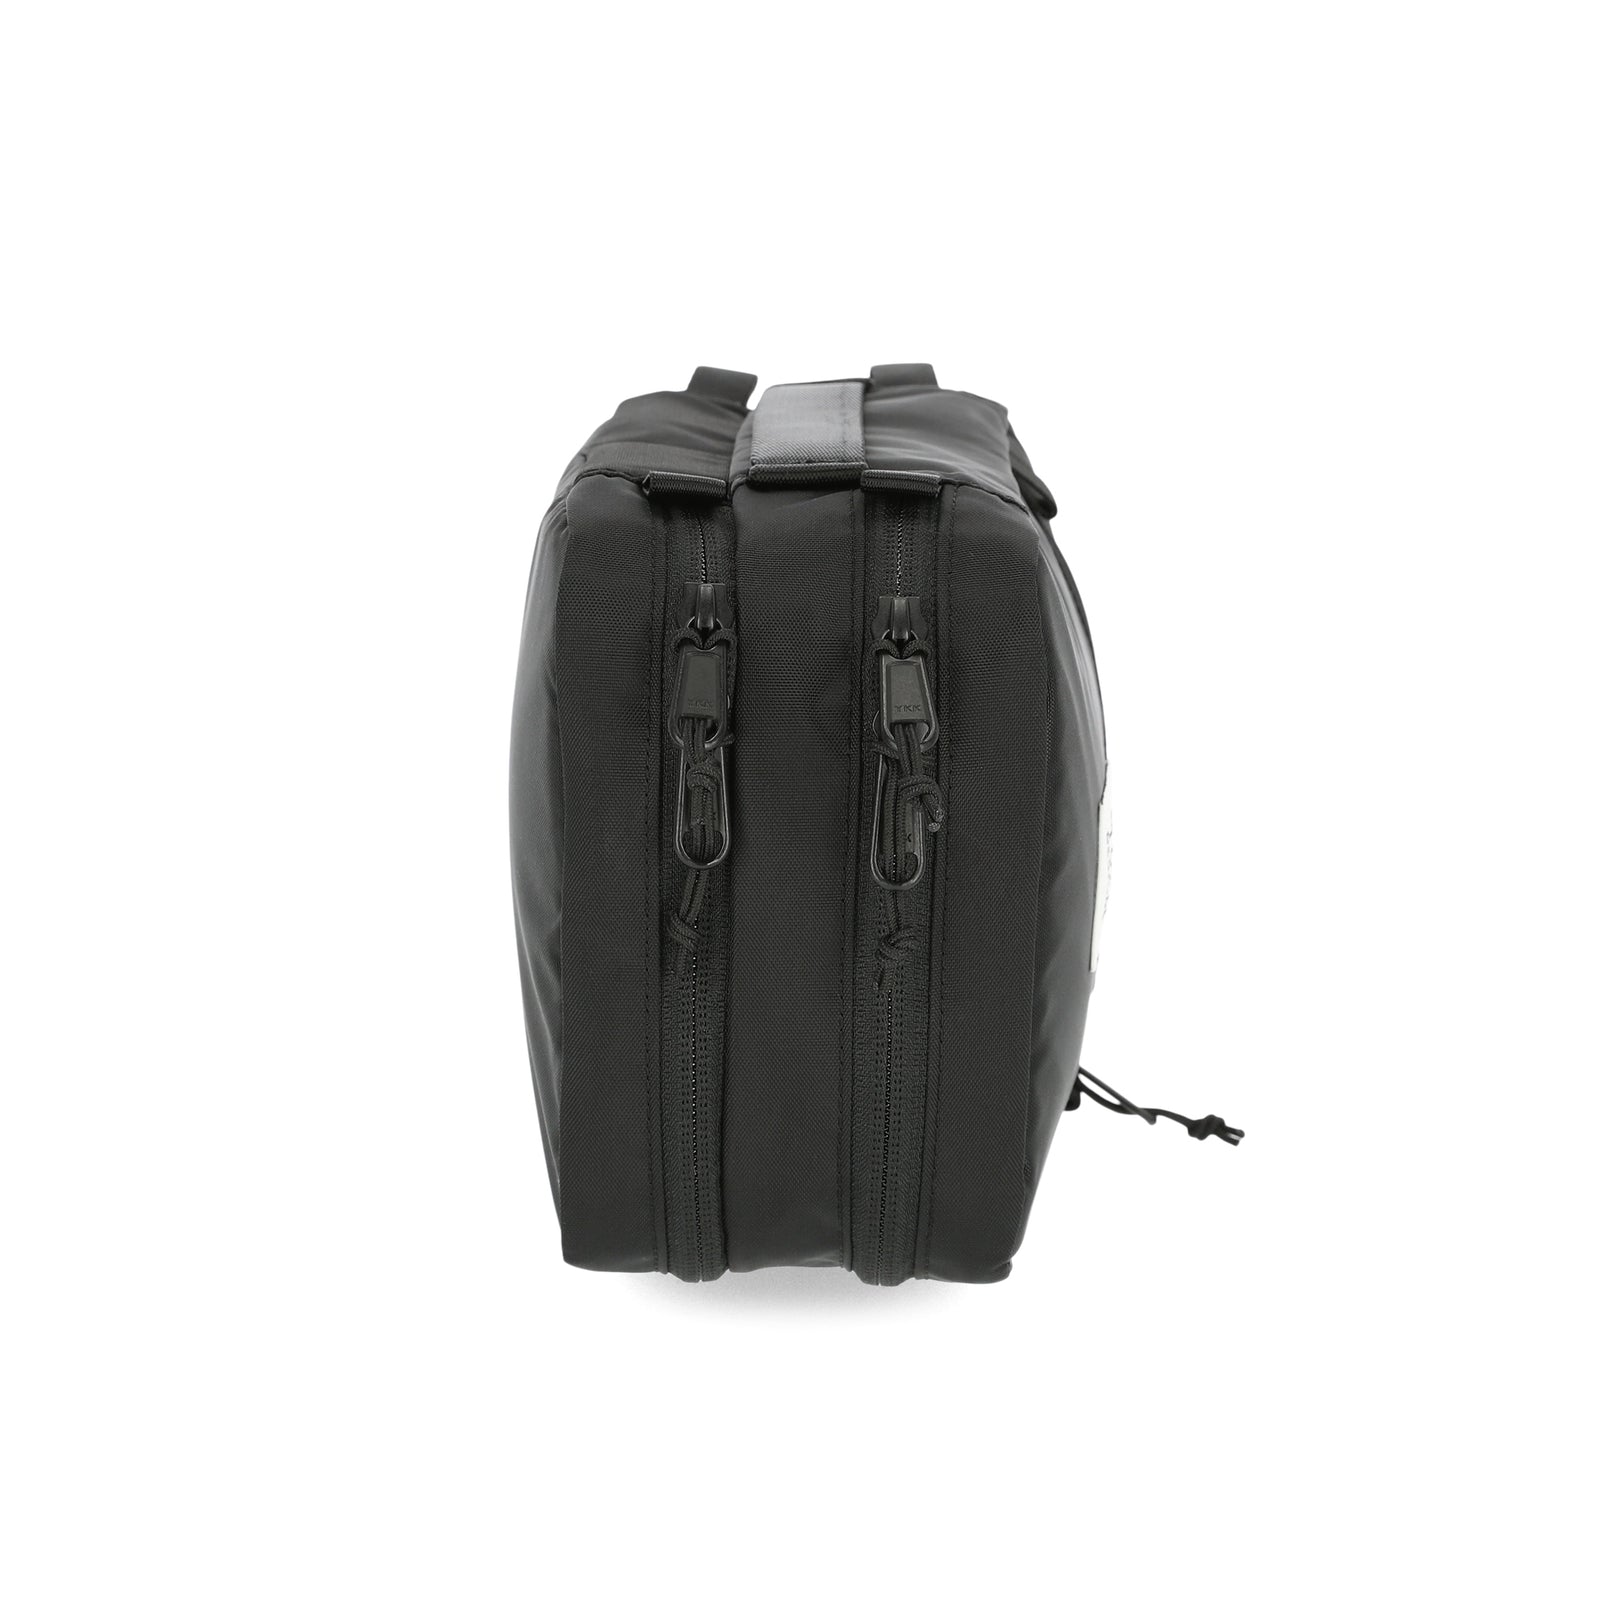 General side shot of Topo Designs Tech electronics organization travel Case in black recycled nylon.